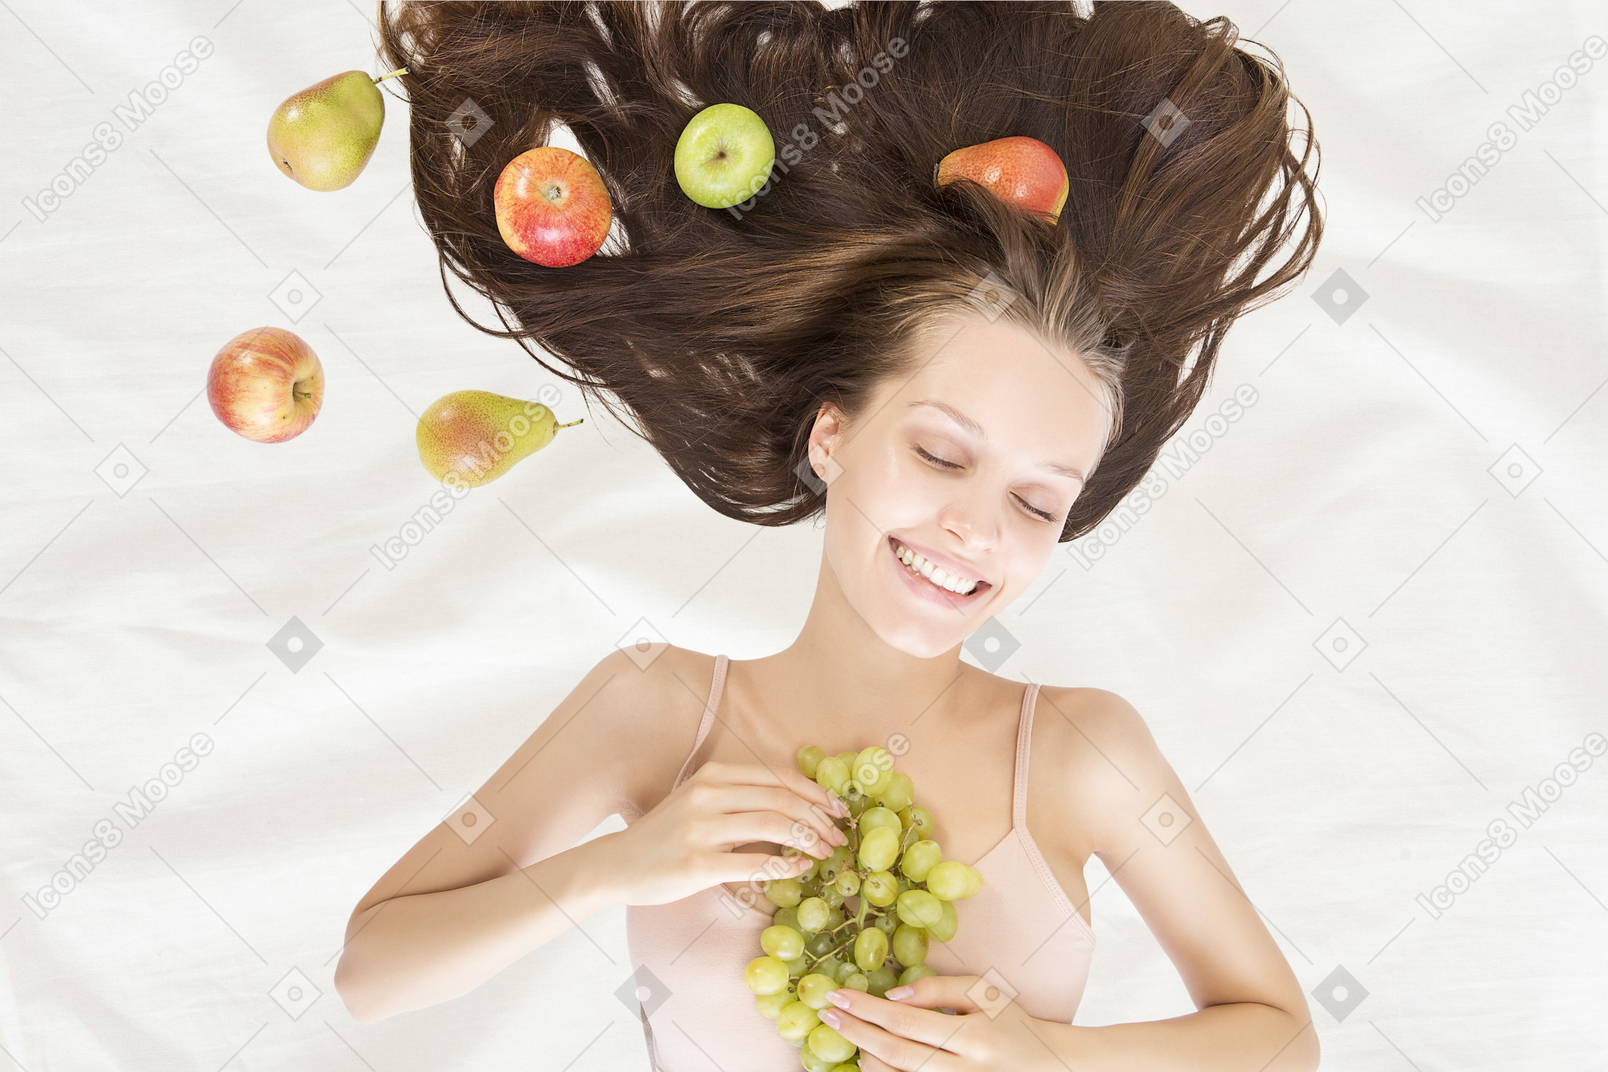 A woman holding a bunch of grapes